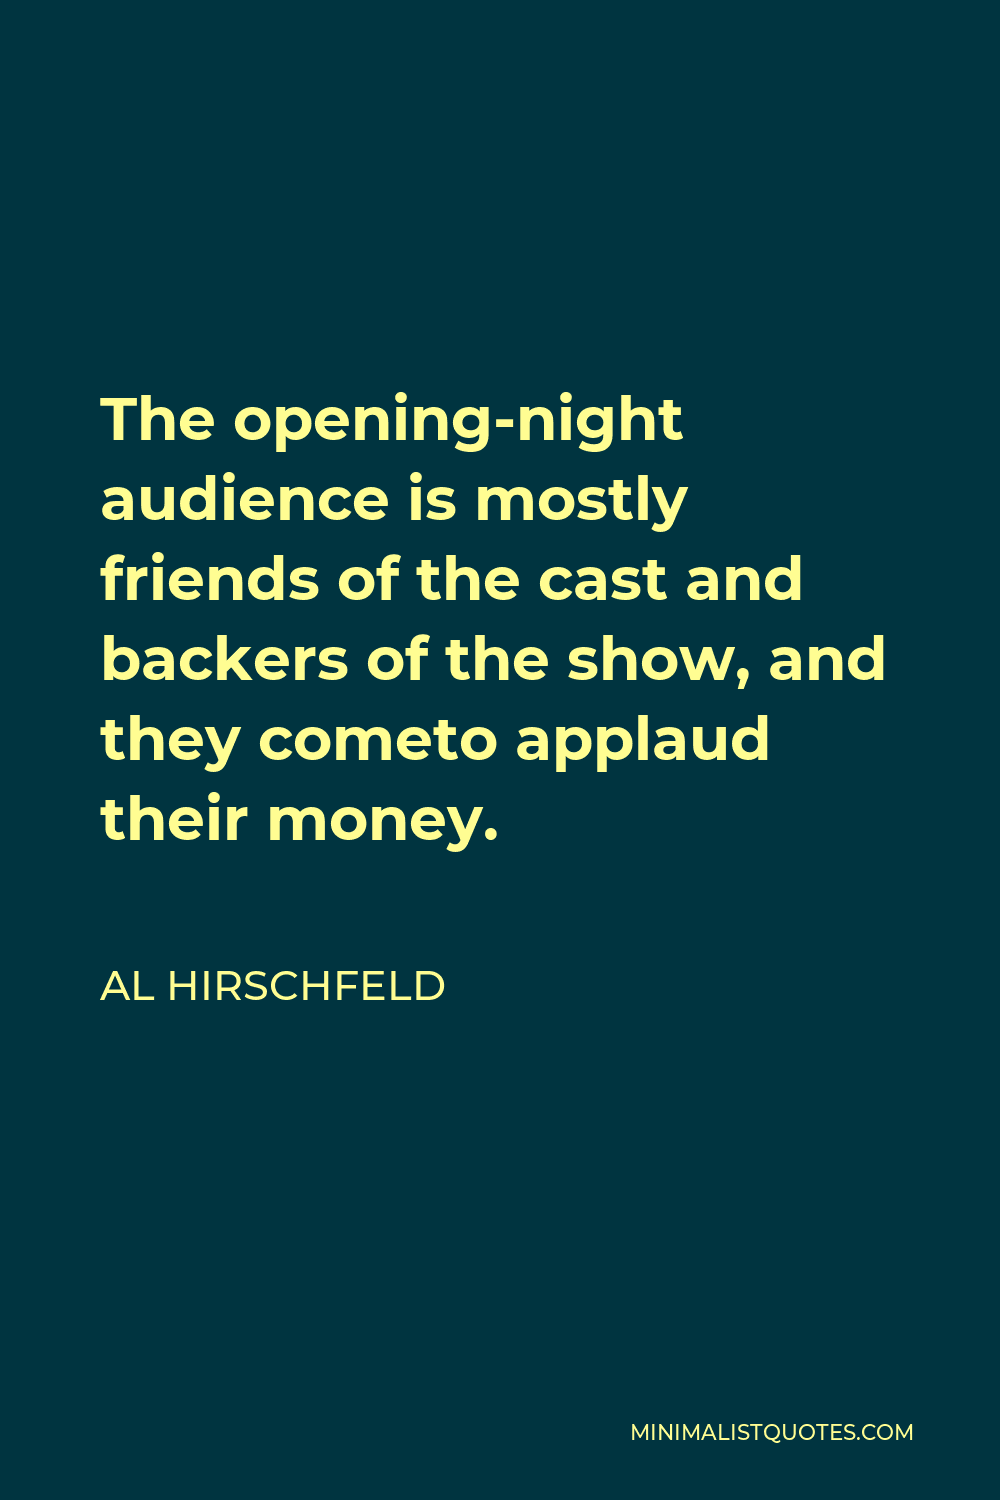 Al Hirschfeld Quote - The opening-night audience is mostly friends of the cast and backers of the show, and they cometo applaud their money.